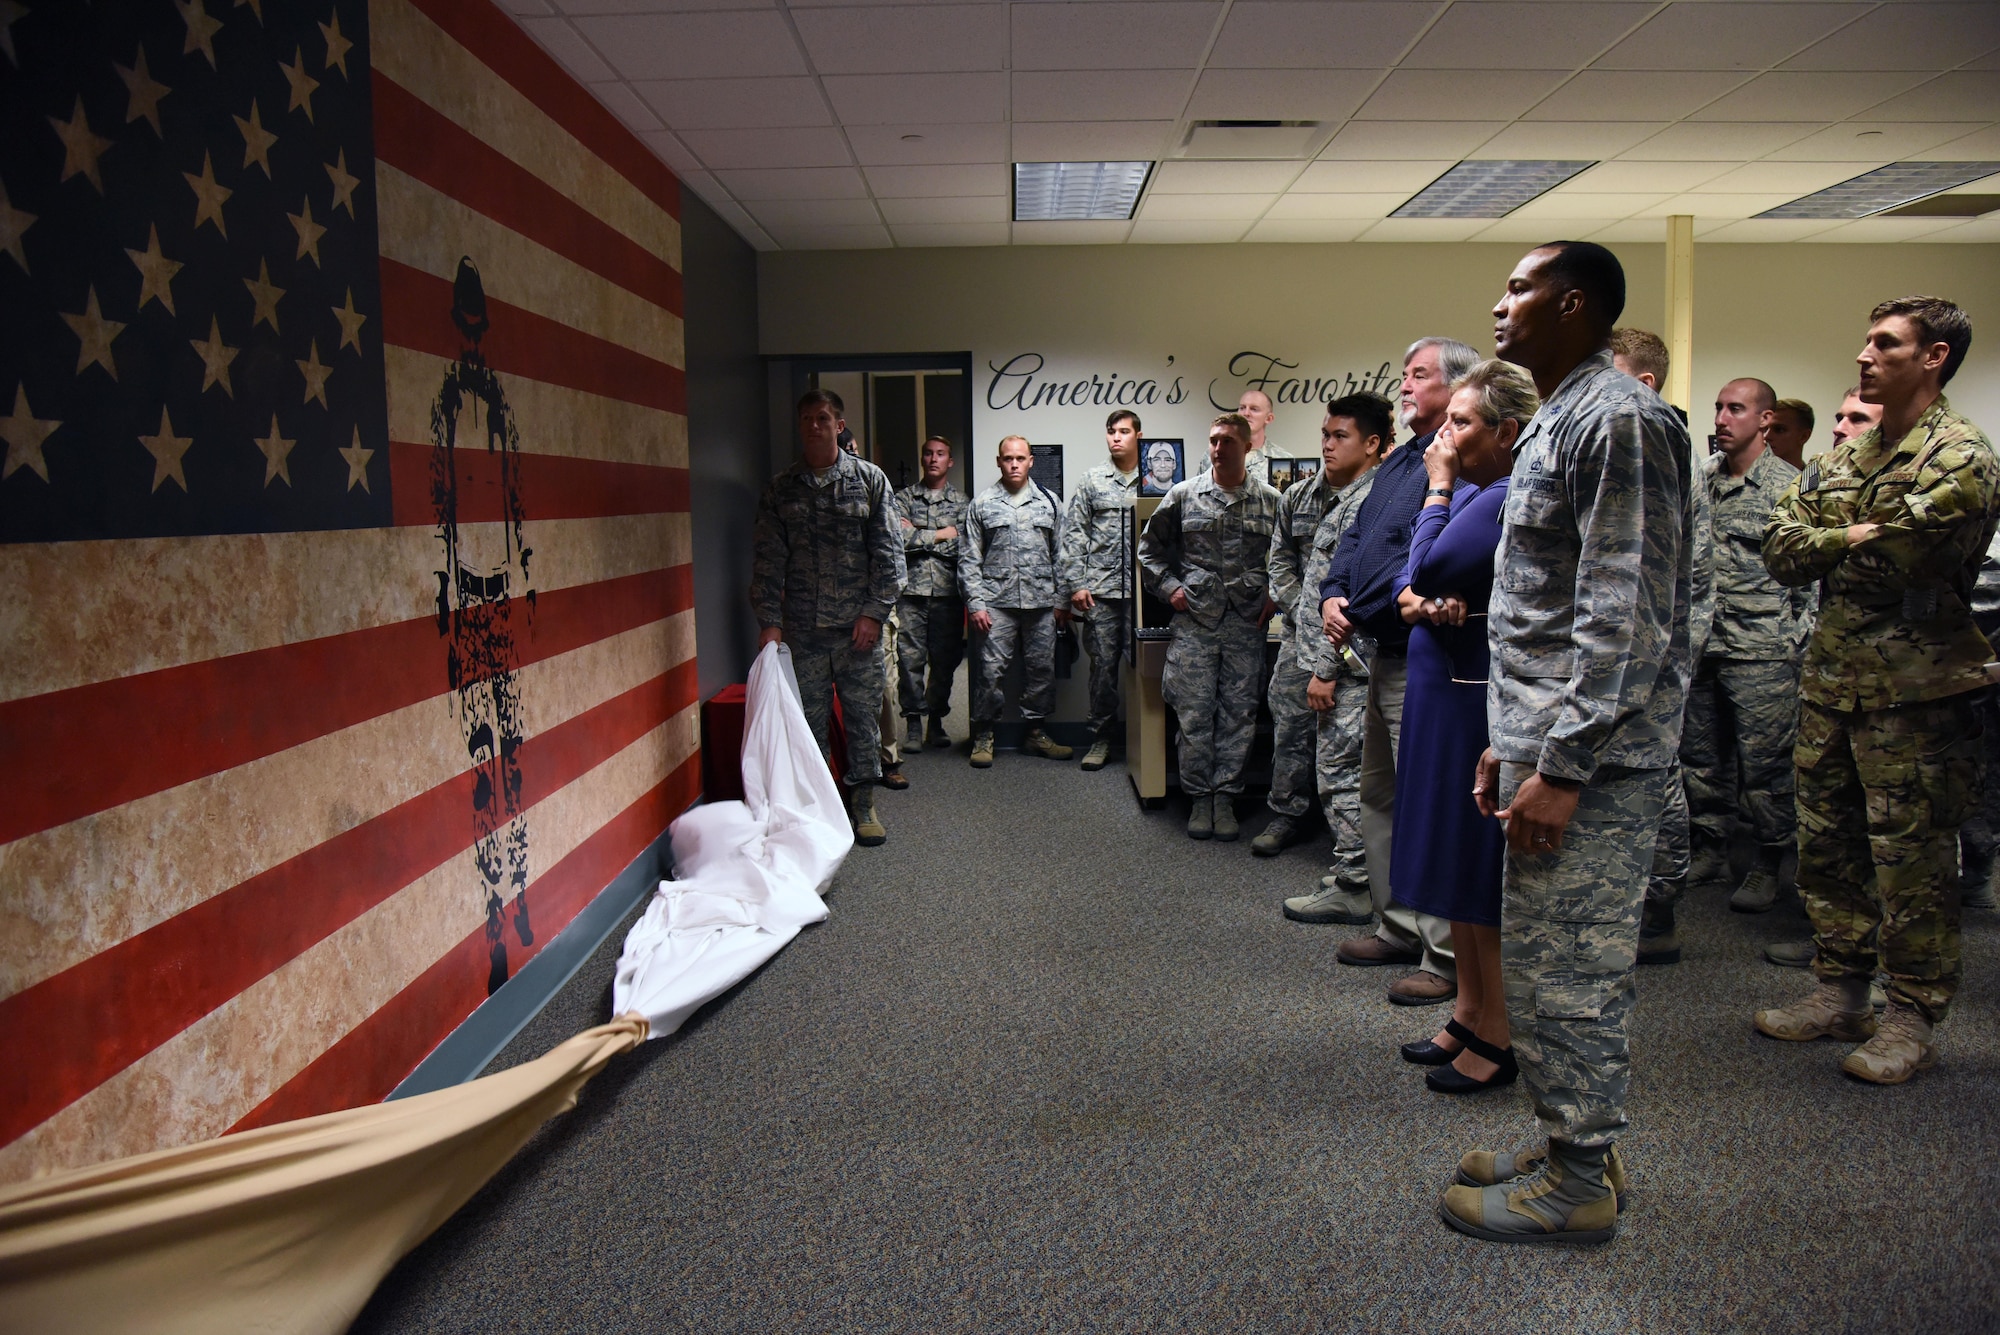 Suzi Fernandez and Brent Sibley are joined by Keesler personnel as they admire a mural inside a training room at Cody Hall during a dedication ceremony to honor their son, Staff Sgt. Forrest Sibley, at Cody Hall Oct. 20, 2017, on Keesler Air Force Base, Mississippi. Sibley was killed in combat in Afghanistan on Aug. 26, 2015. Sibley, a four-time Bronze Star medal recipient, was a combat controller who received his initial technical training from the 334th Training Squadron here. (U.S. Air Force photo by Kemberly Groue)